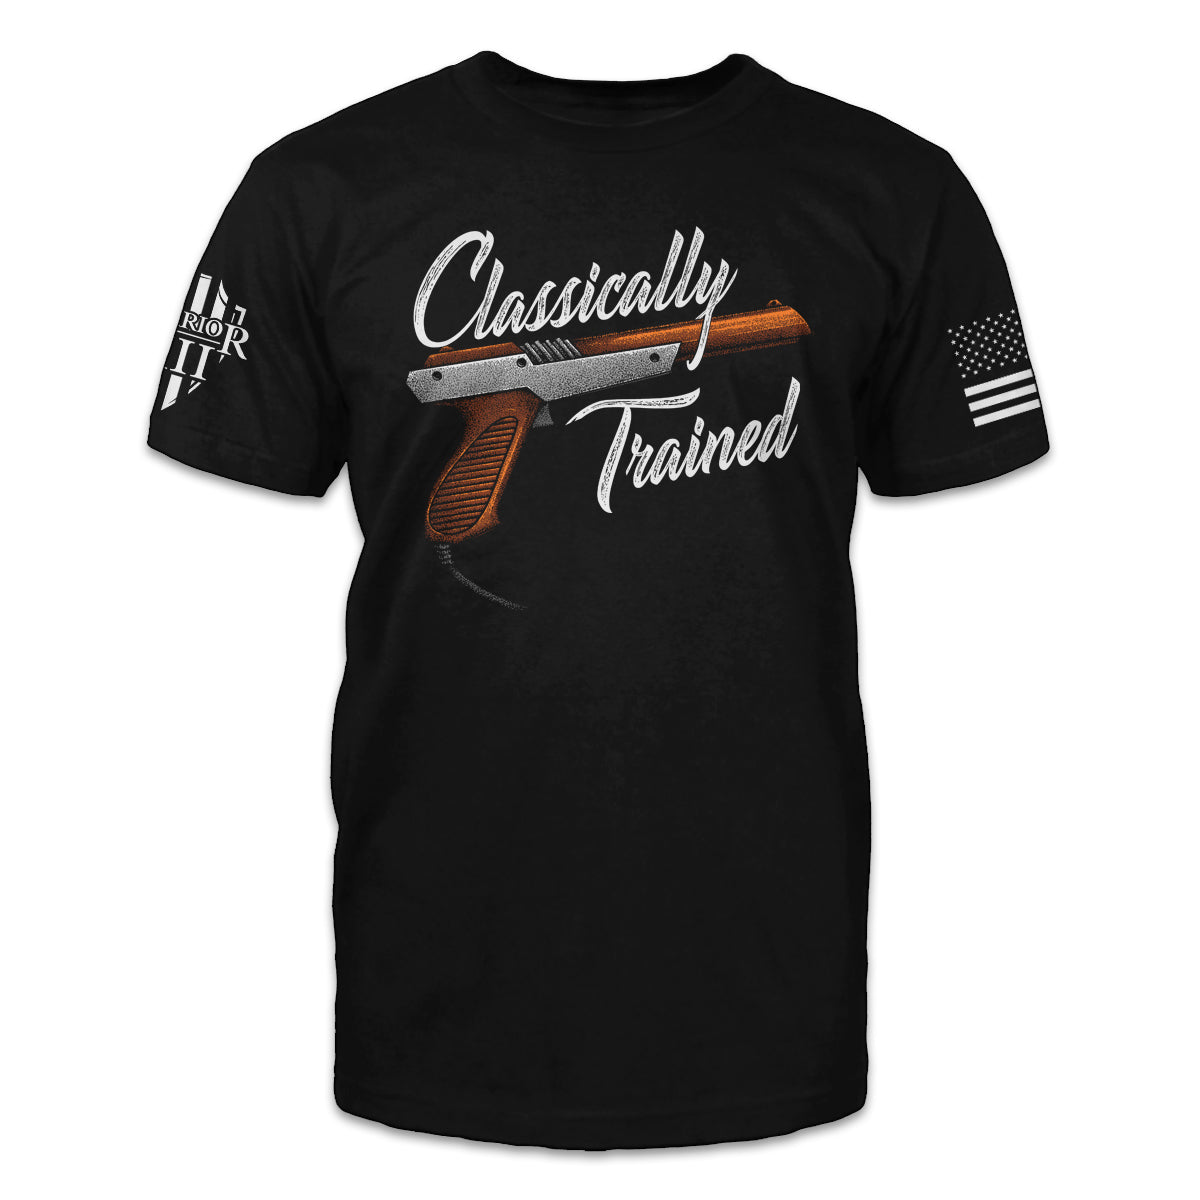 A black t-shirt with the words "Classically Trained" and a pistol printed on the front of the shirt.